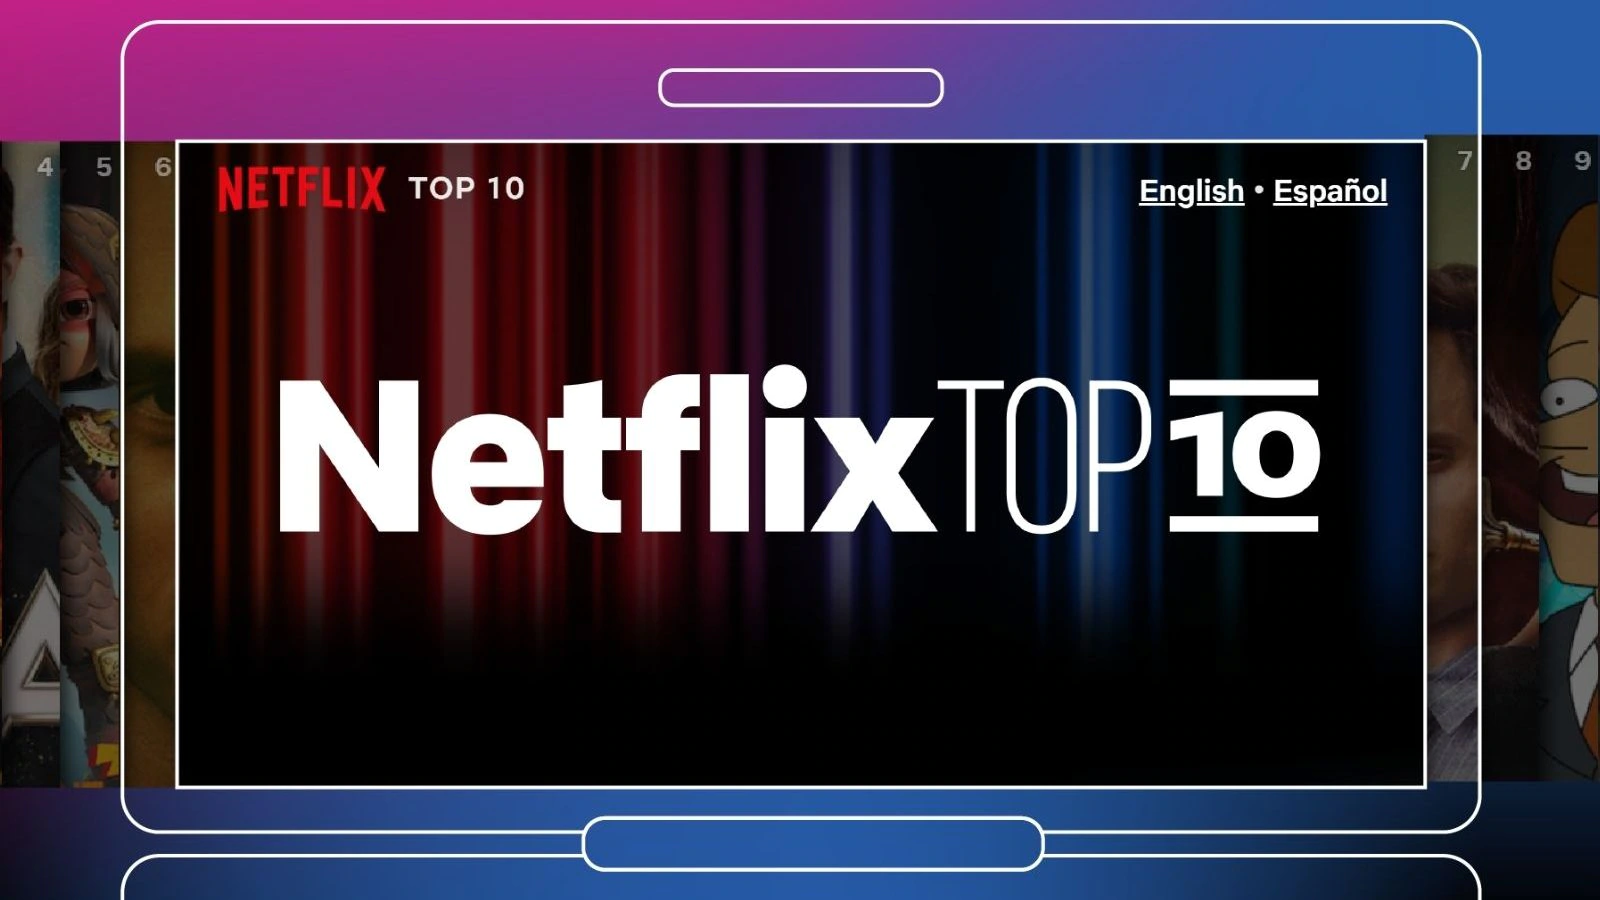 Netflix introduces new ‘Top 10’ website with updated metrics